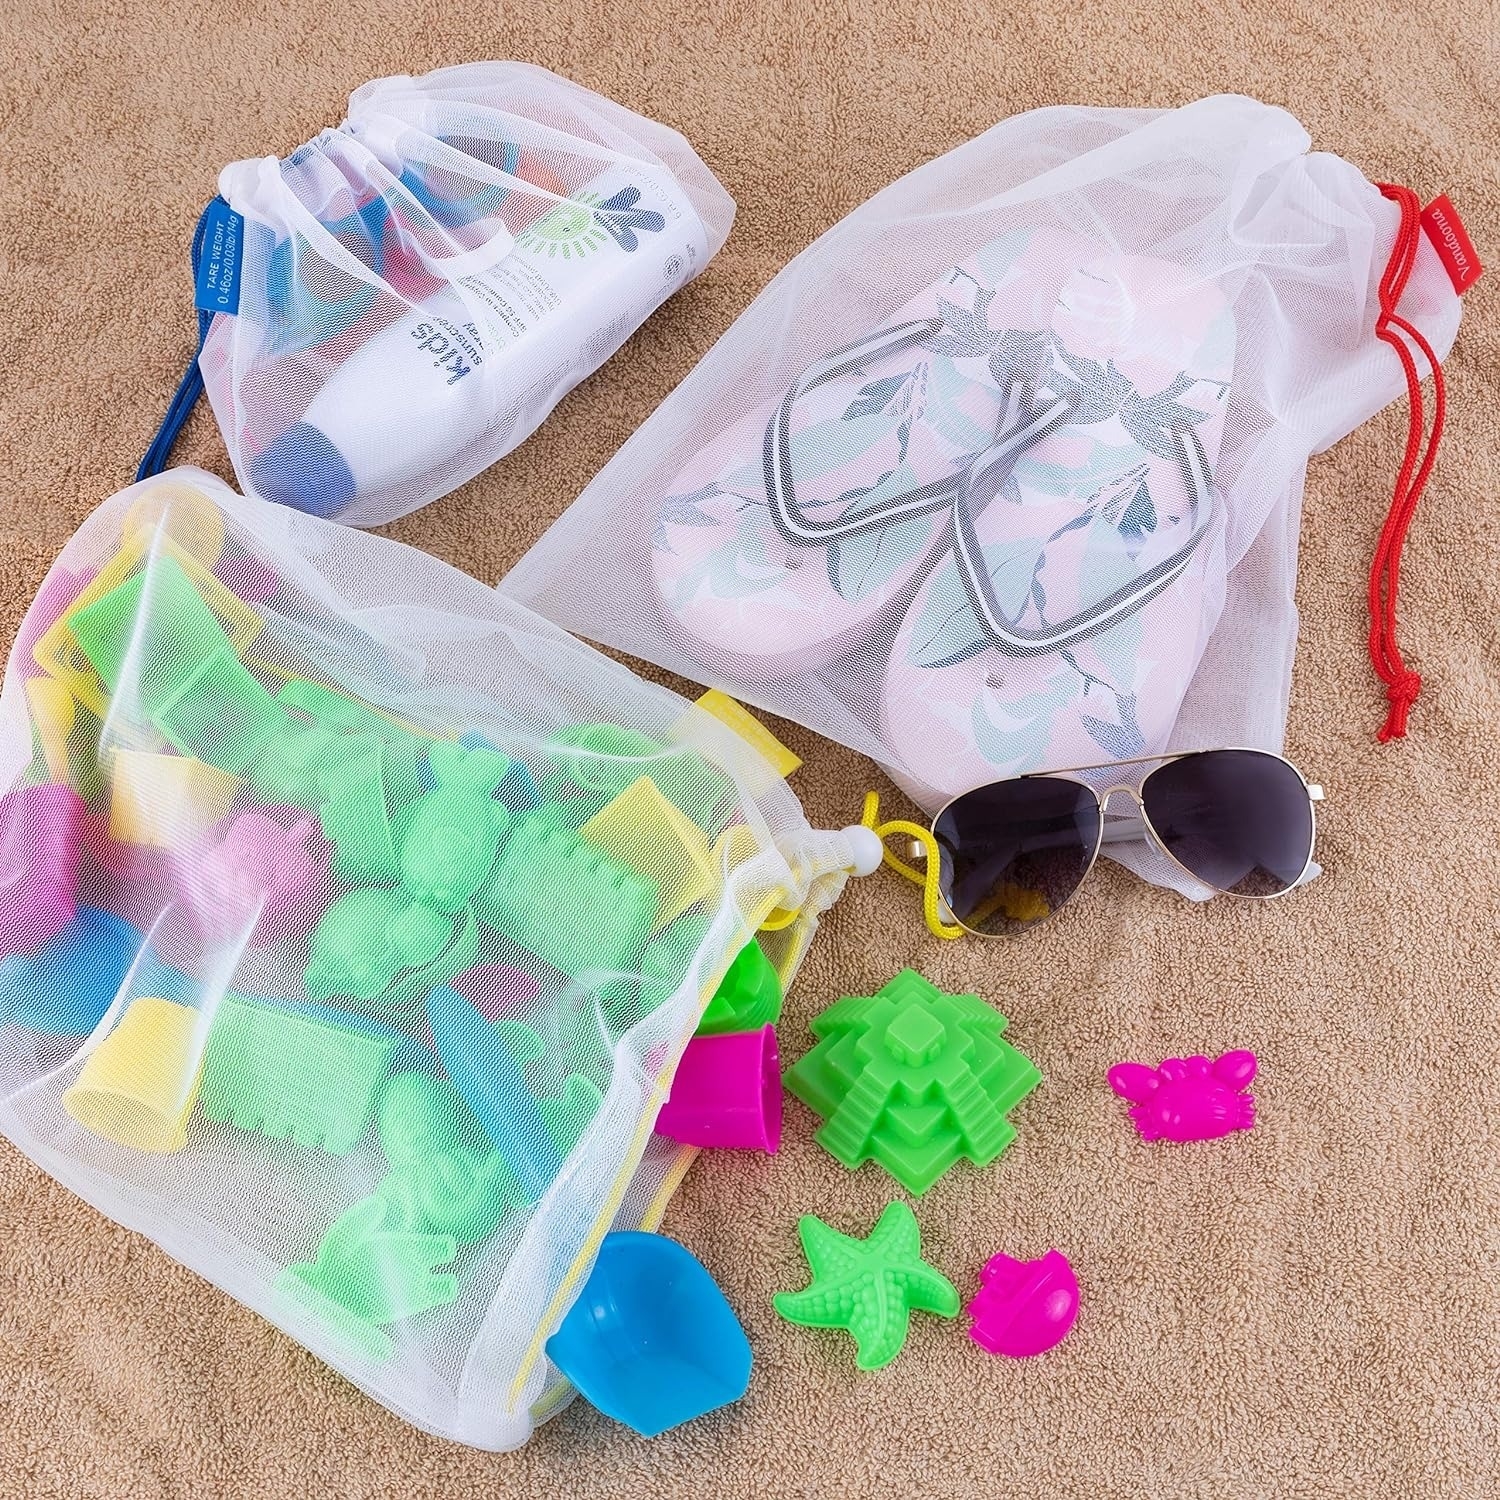 Beach essentials with mesh bags, flip-flops, sunglasses, and assorted sand toys